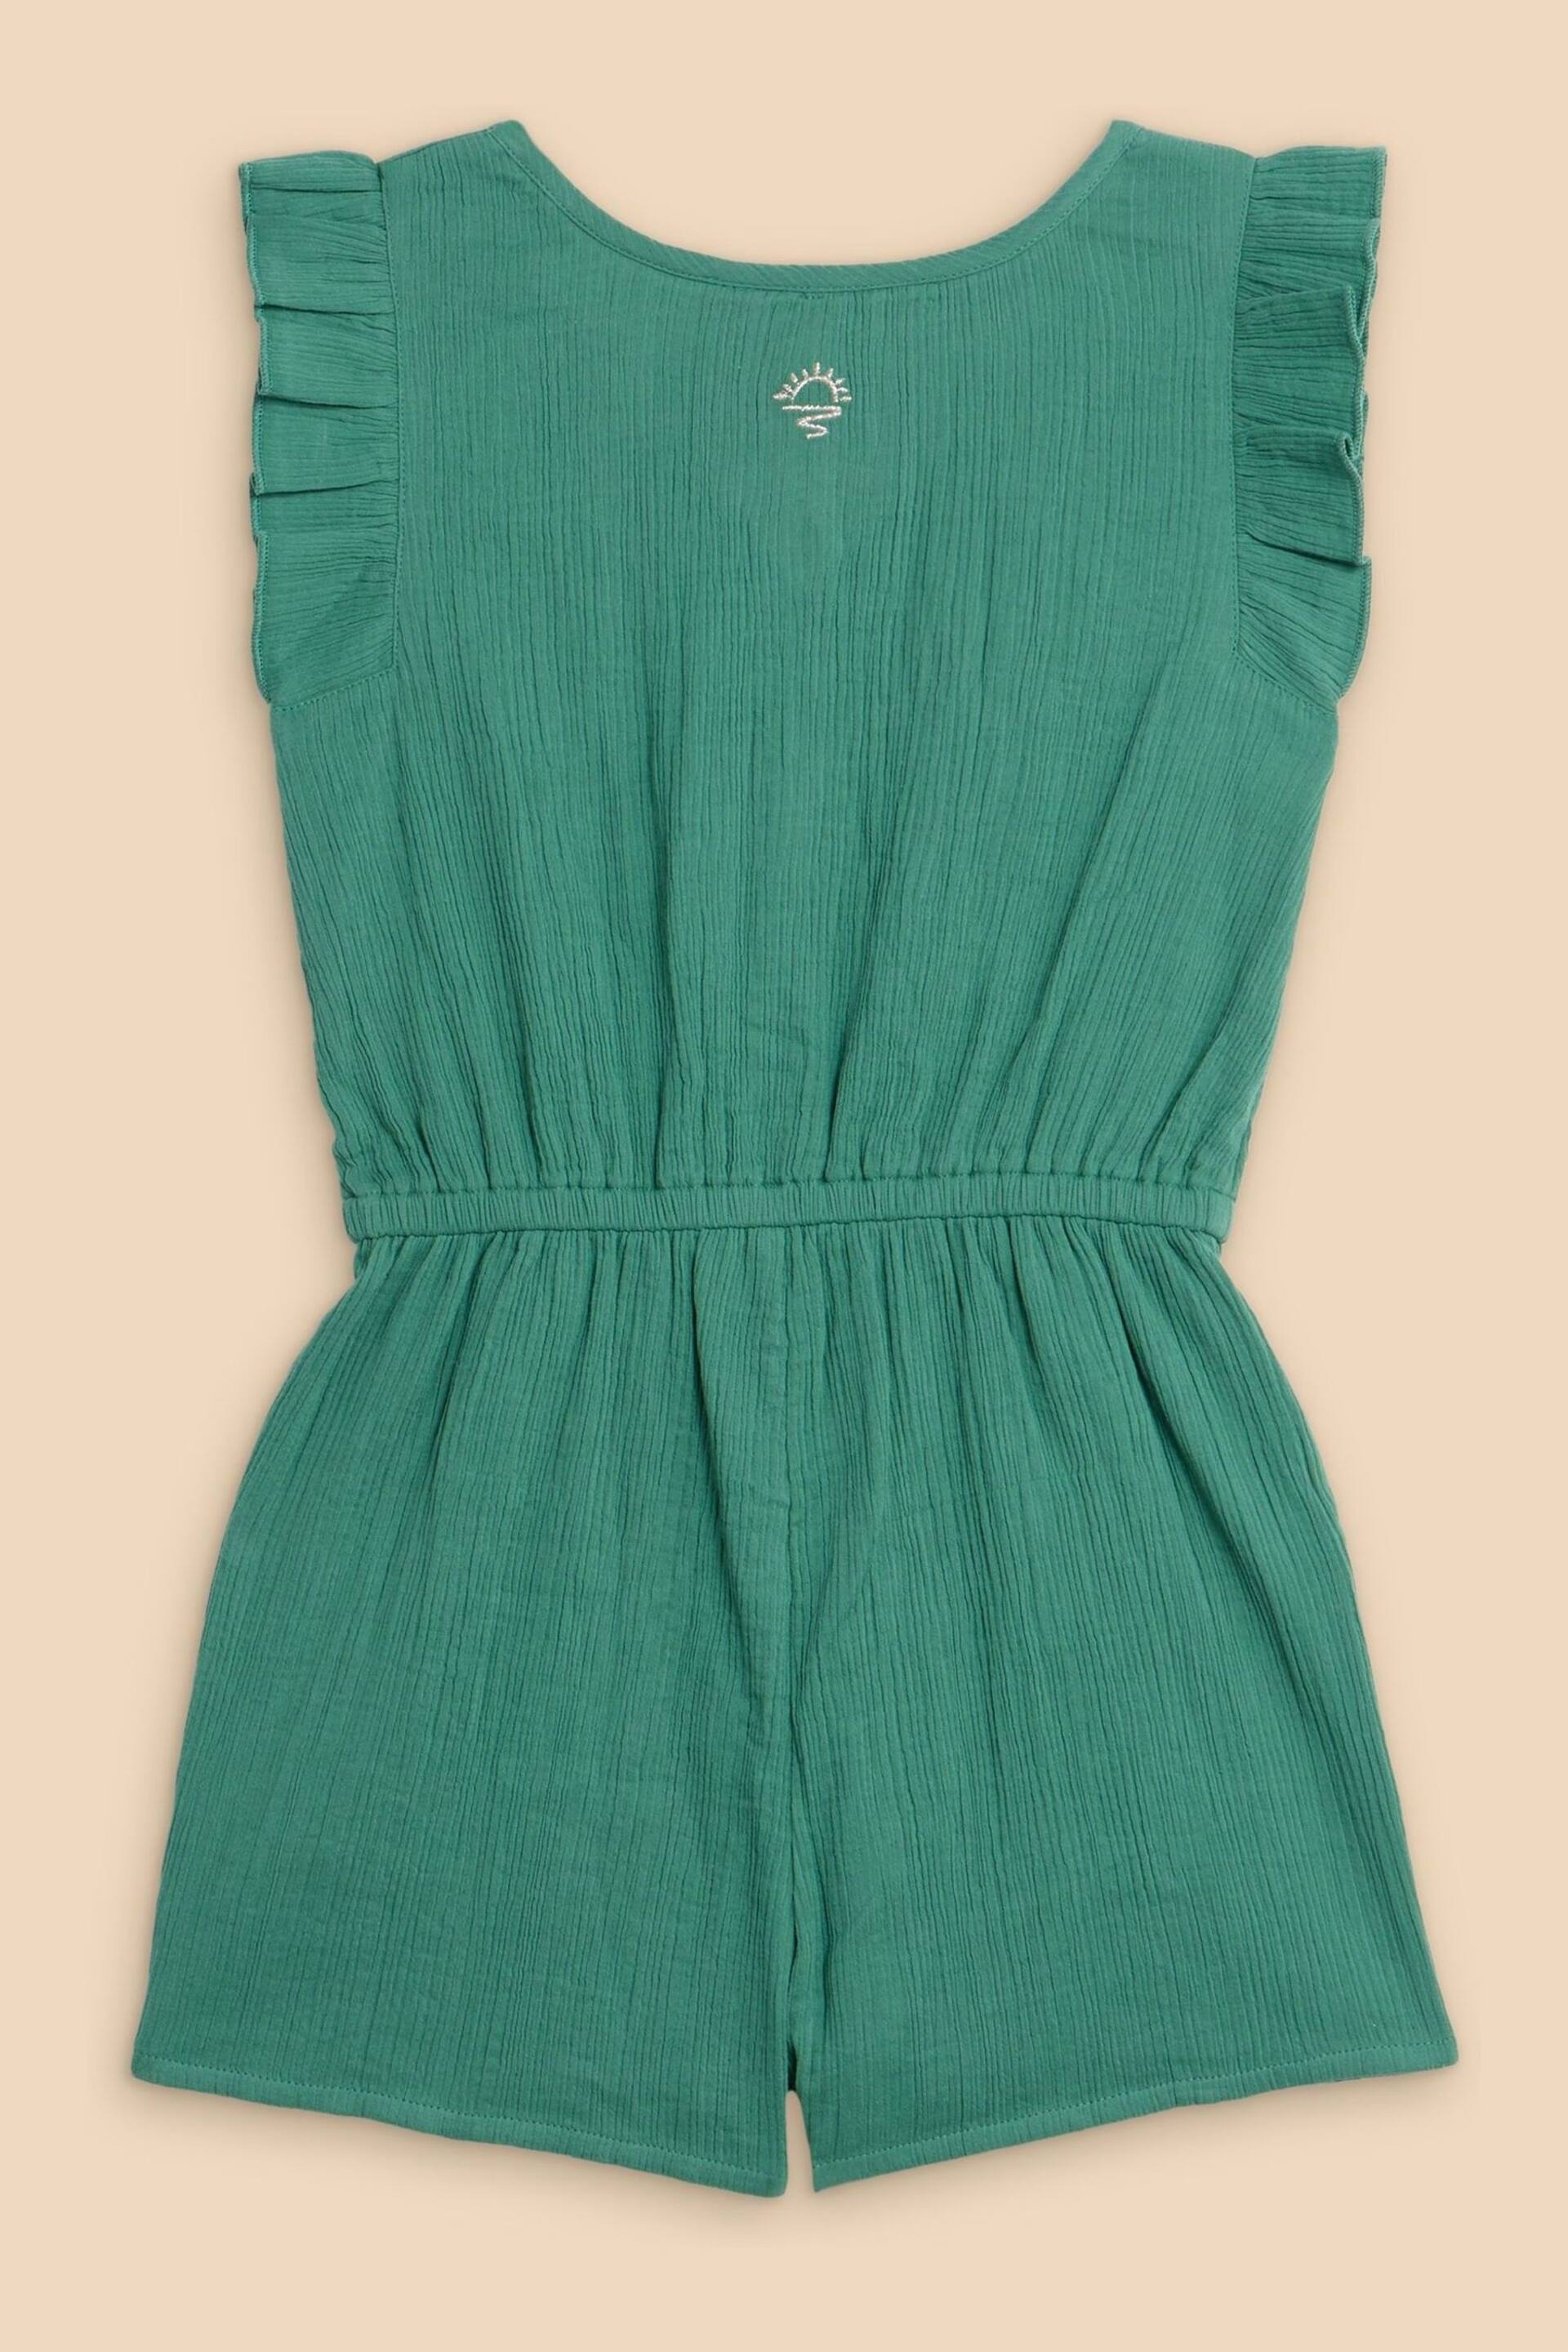 White Stuff Green Woven Frill Playsuit - Image 2 of 3